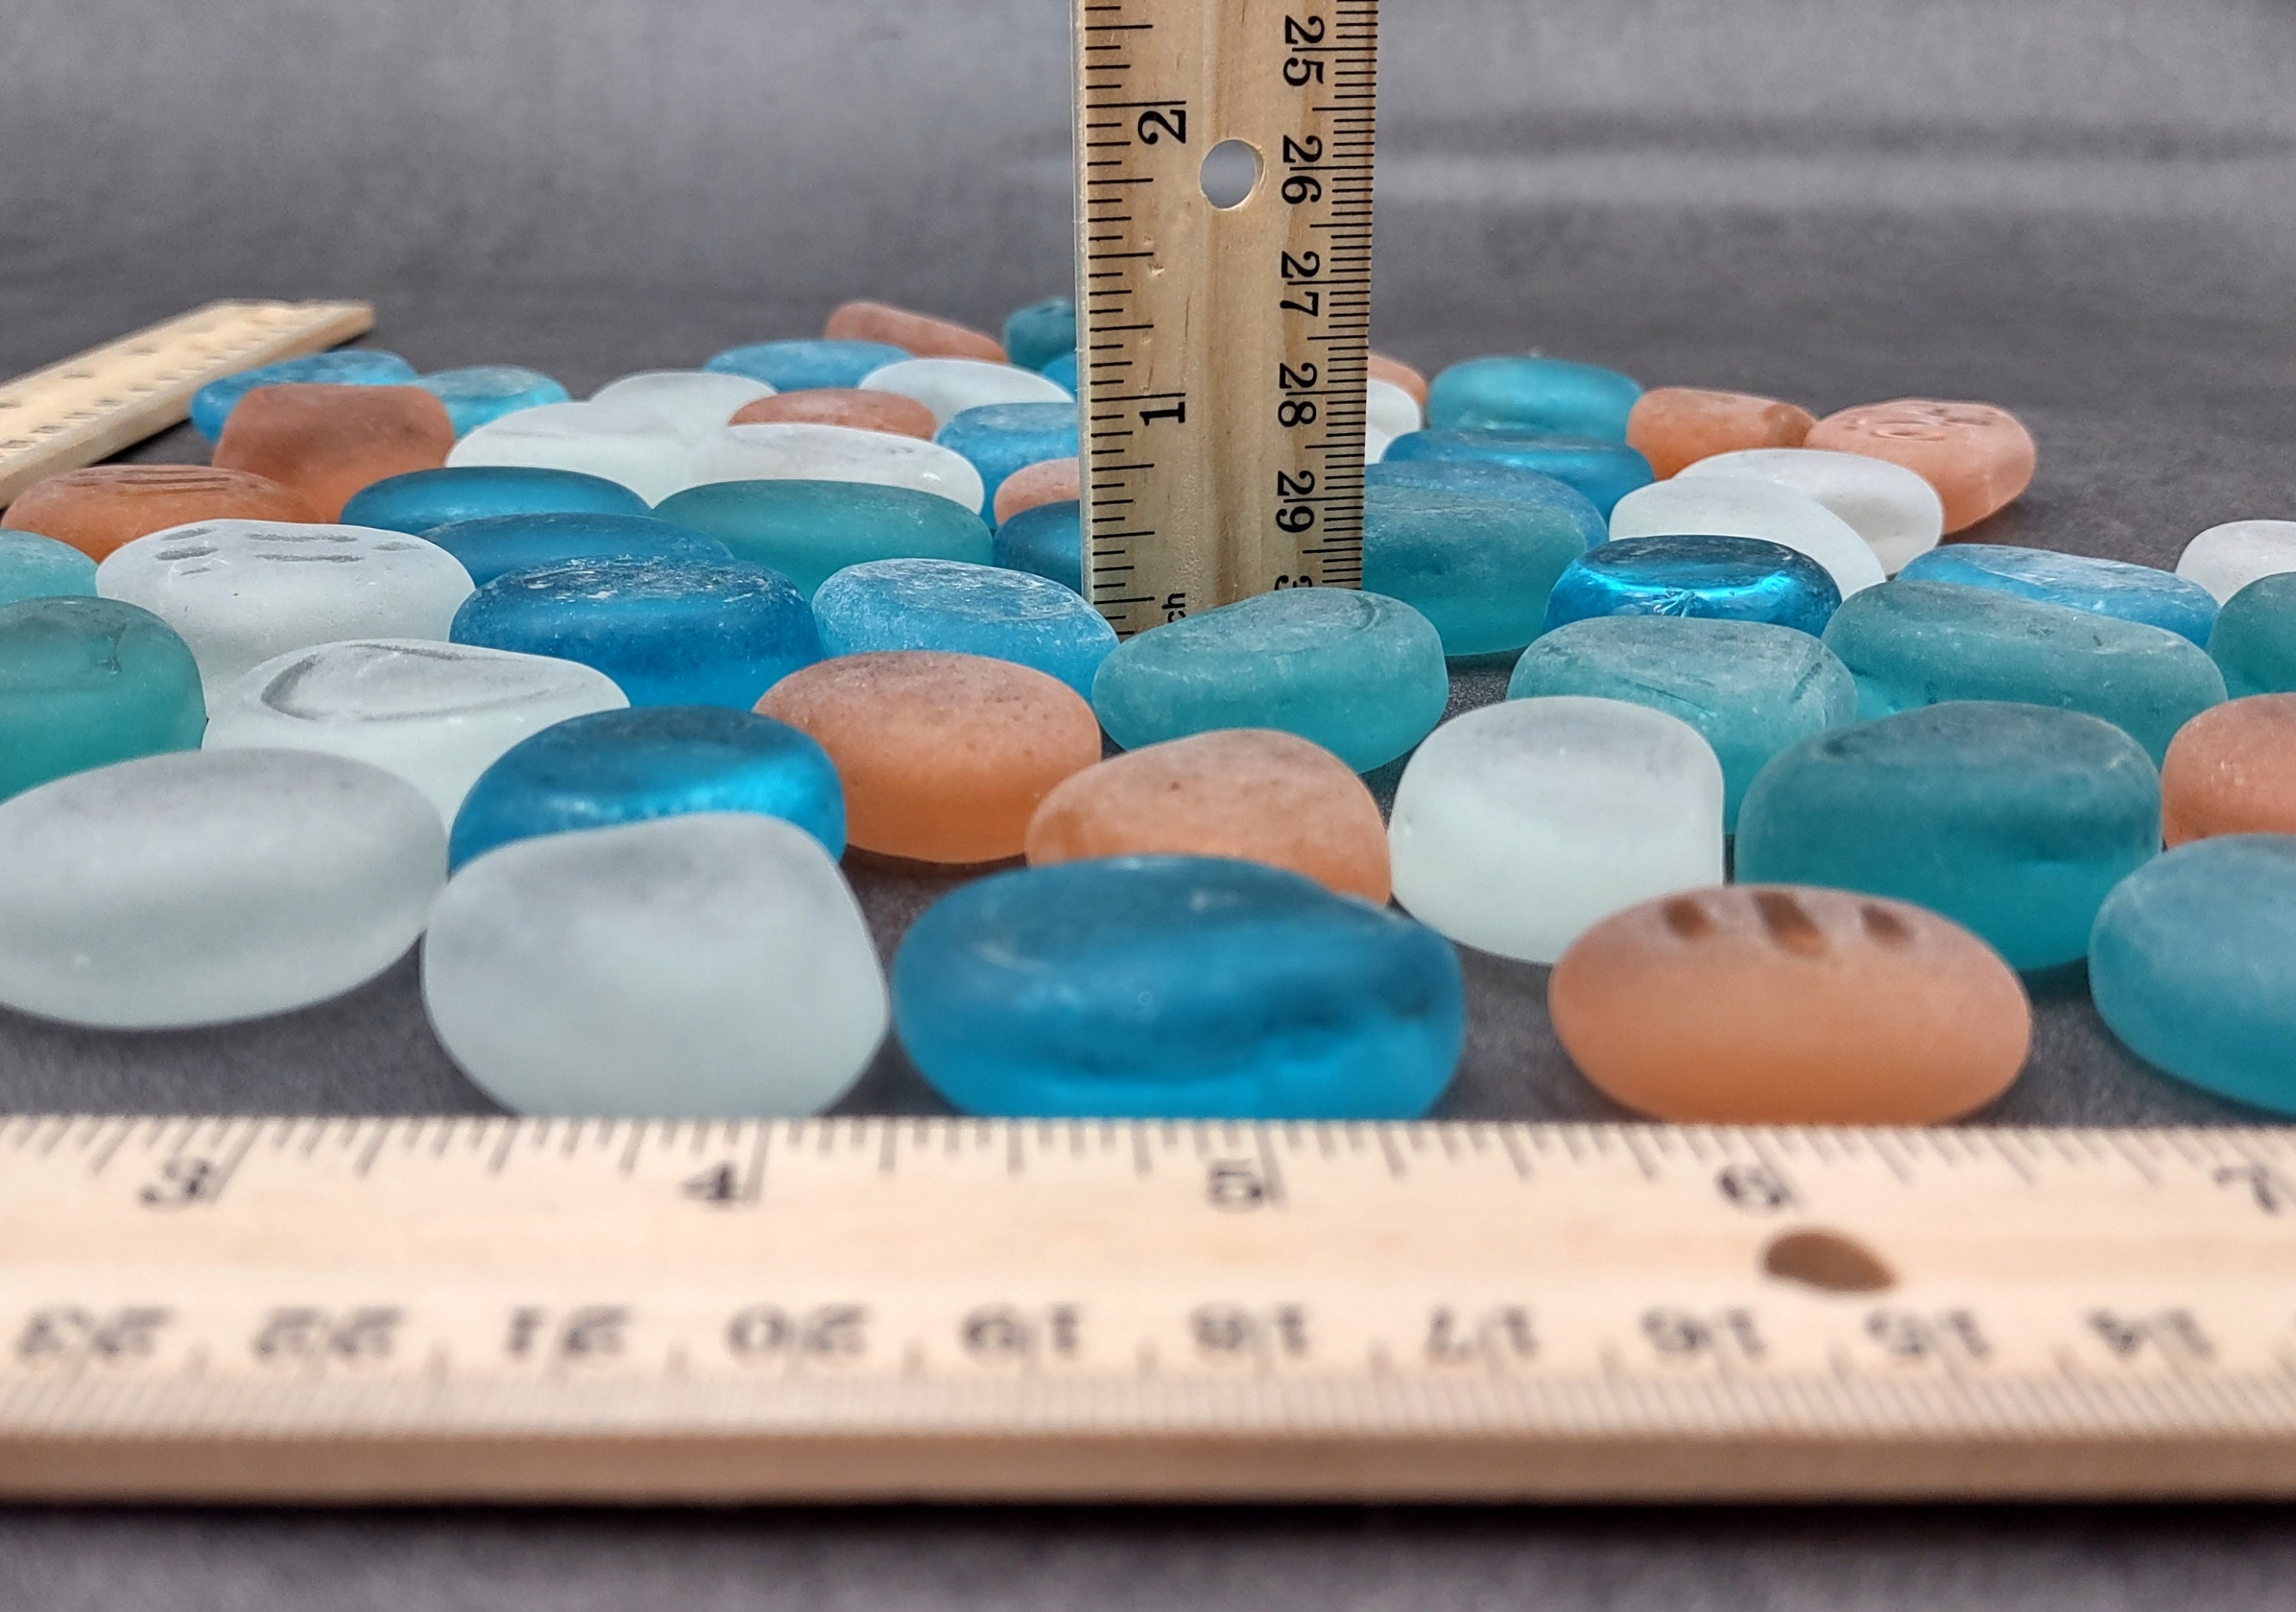 Beach Sea Glass Rounded Blue Yellow White Assorted Pebbles (approx. 1  Kilogram or 2.2 lbs. 1-1.5 inches) Man Made Tumbled Frosted Glass!